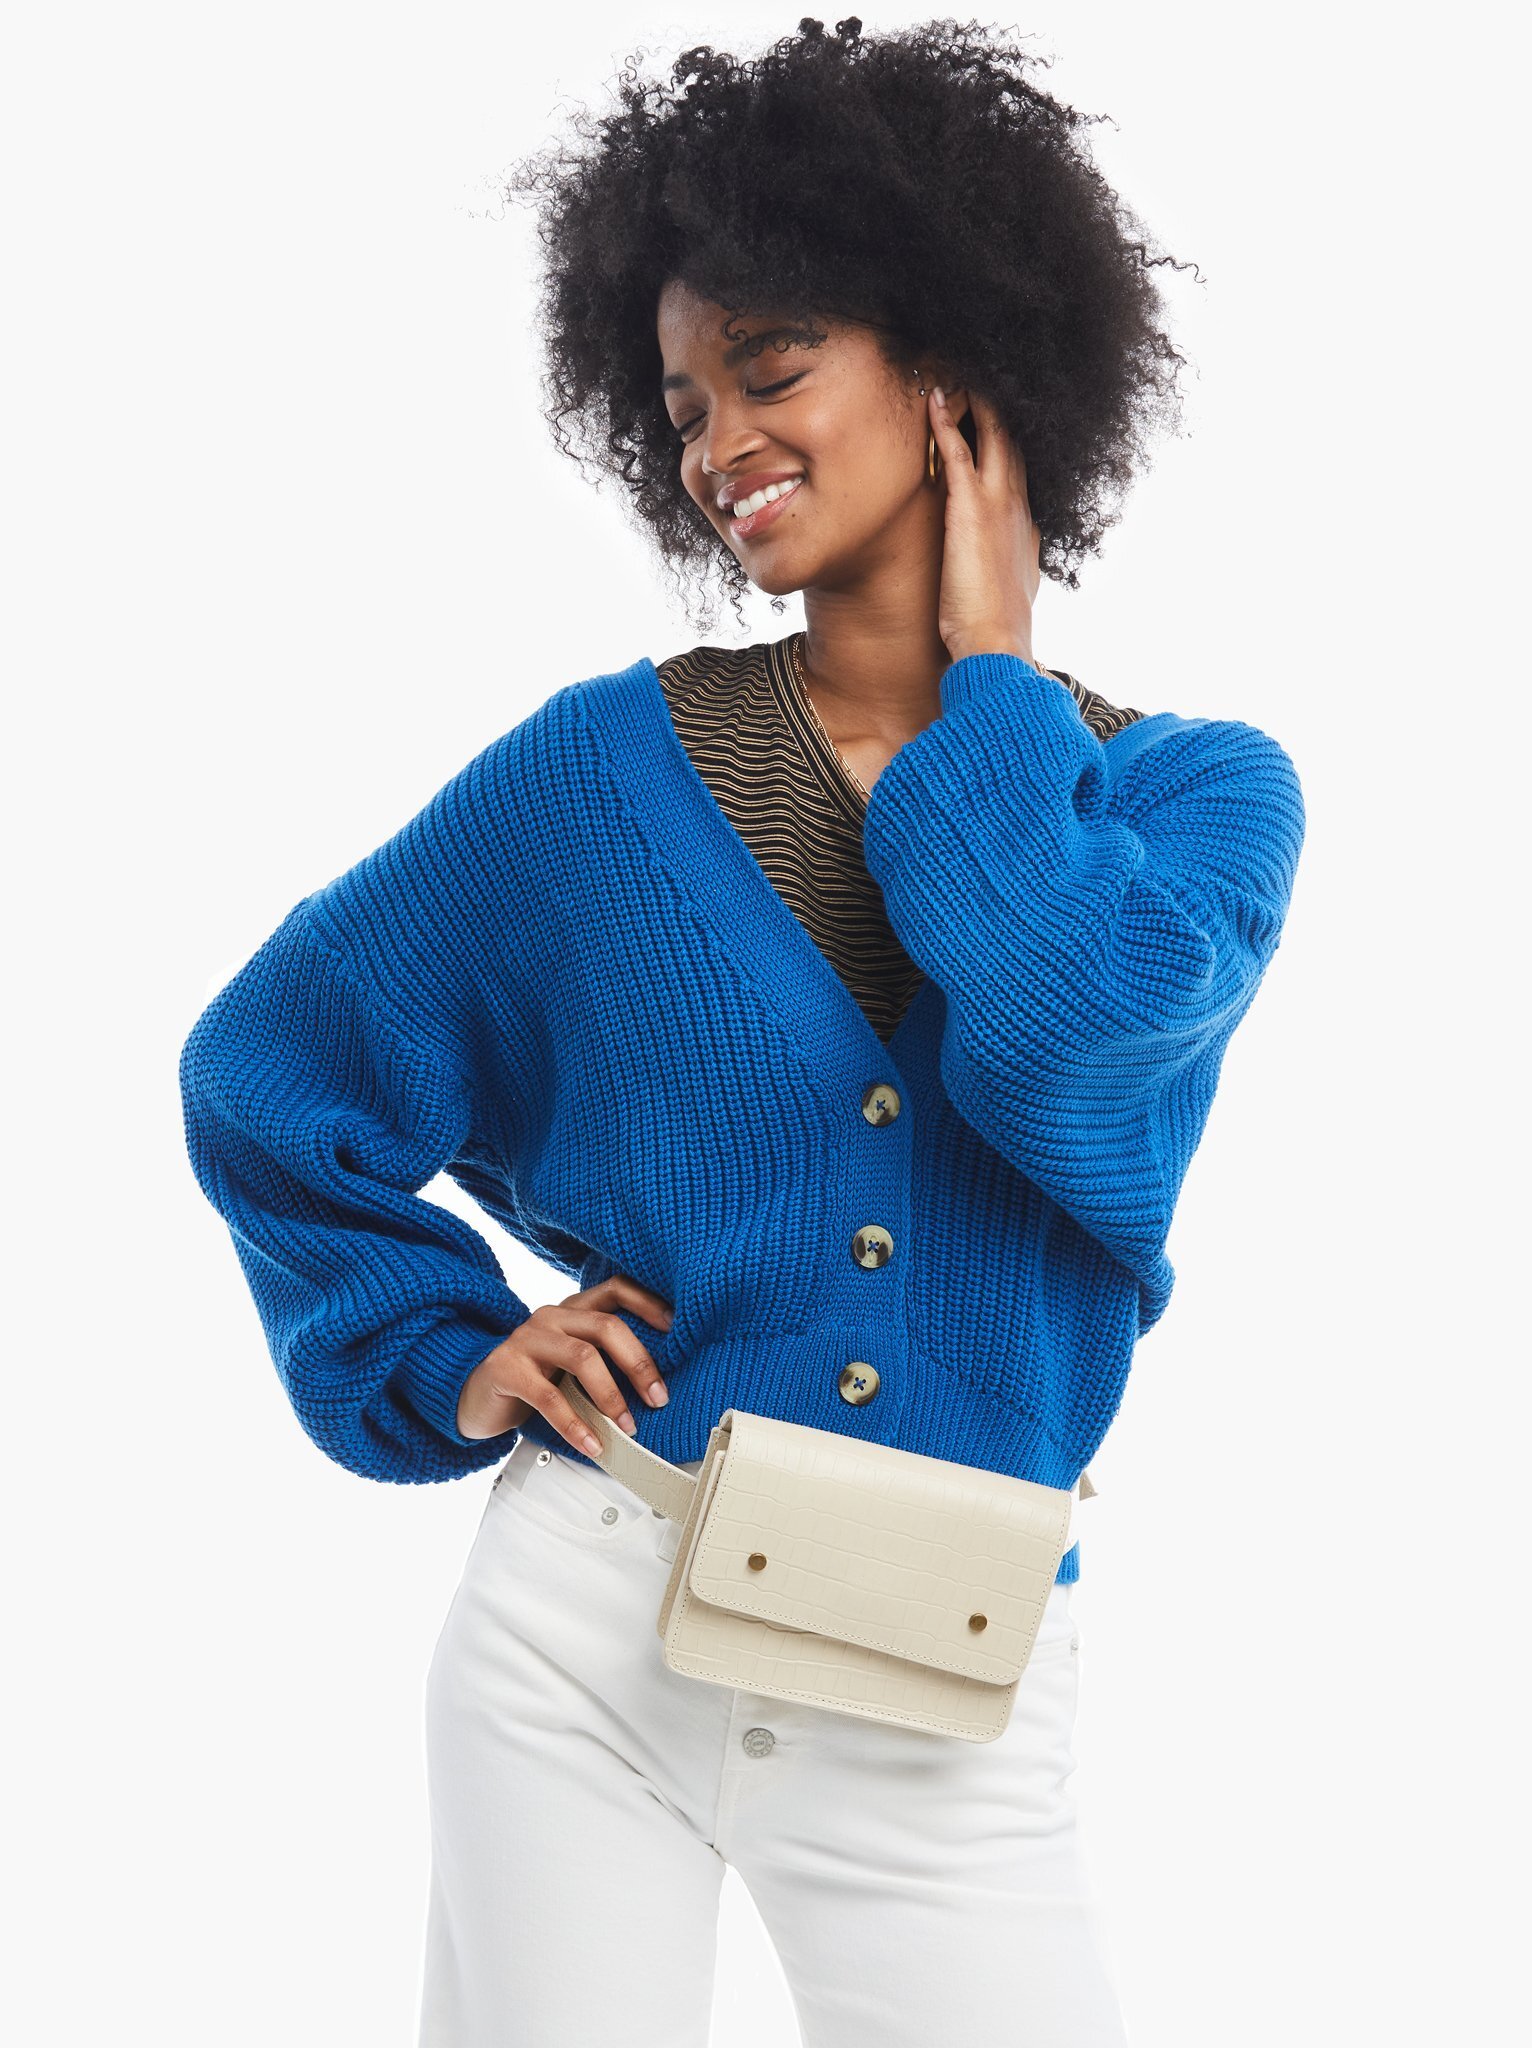 9 Affordable, Sustainable & Fair Trade Handbags — Sustainably Chic